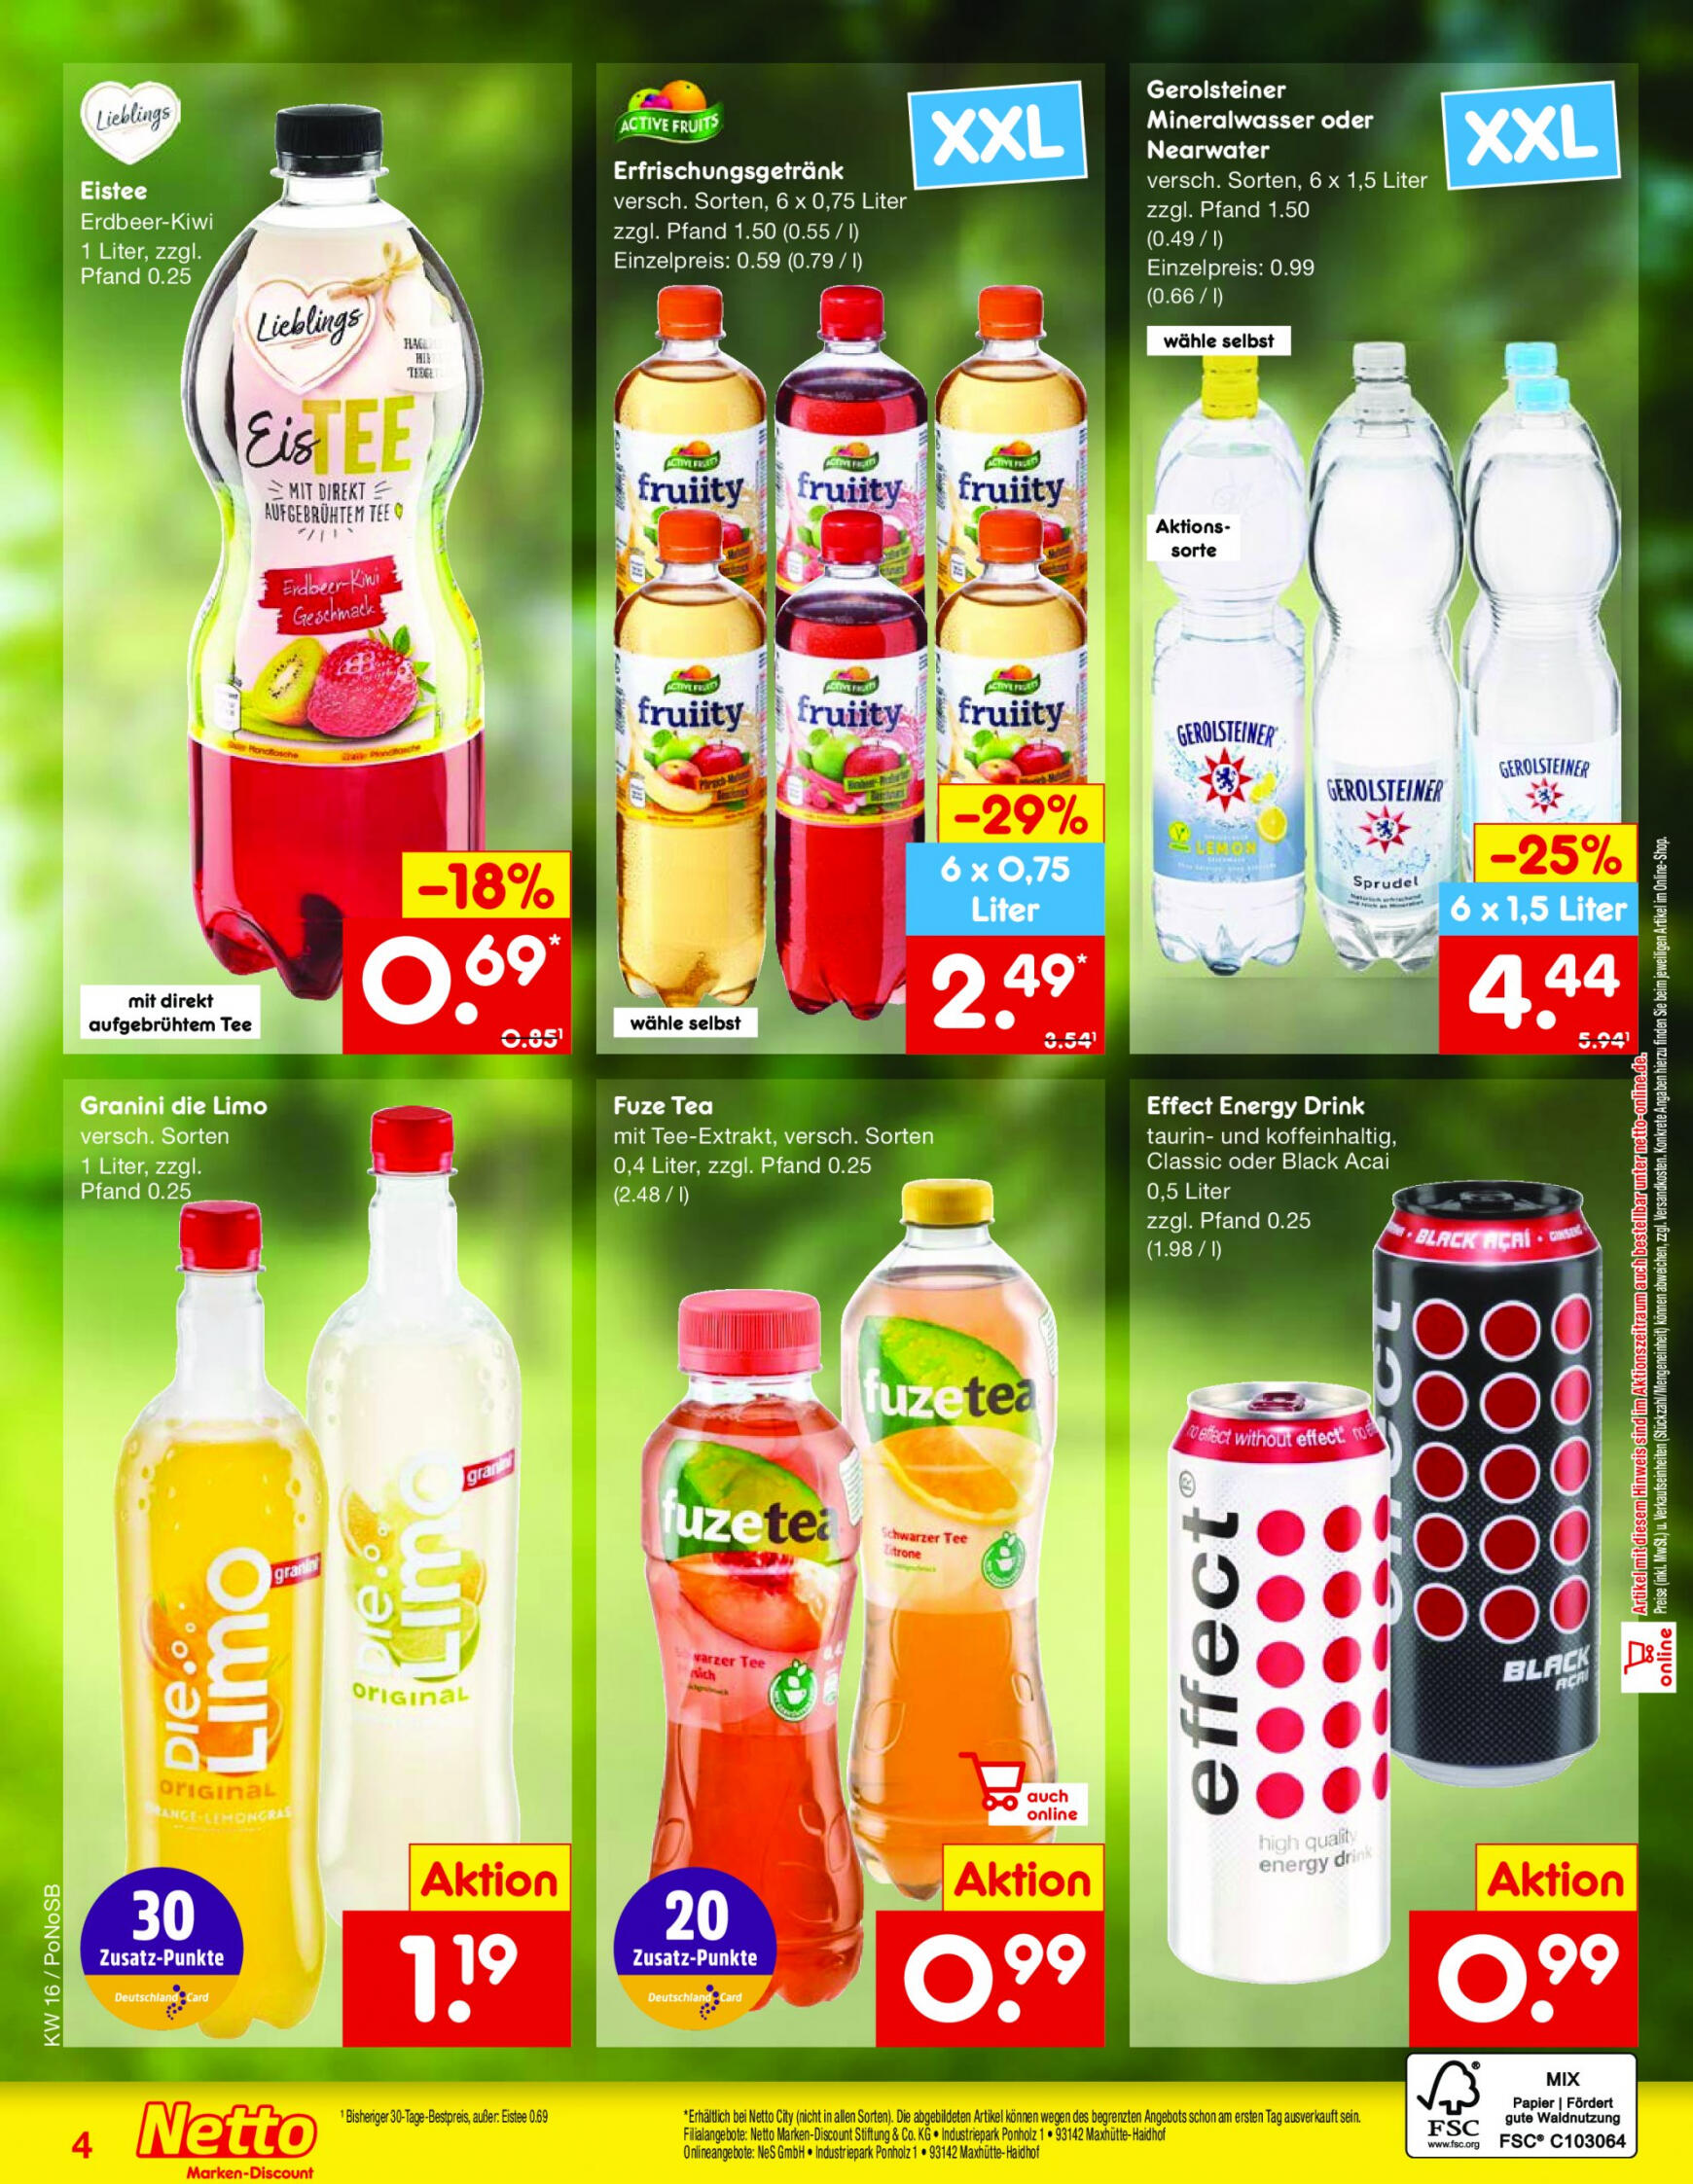 netto - Flyer Netto aktuell 15.04. - 20.04. - page: 21